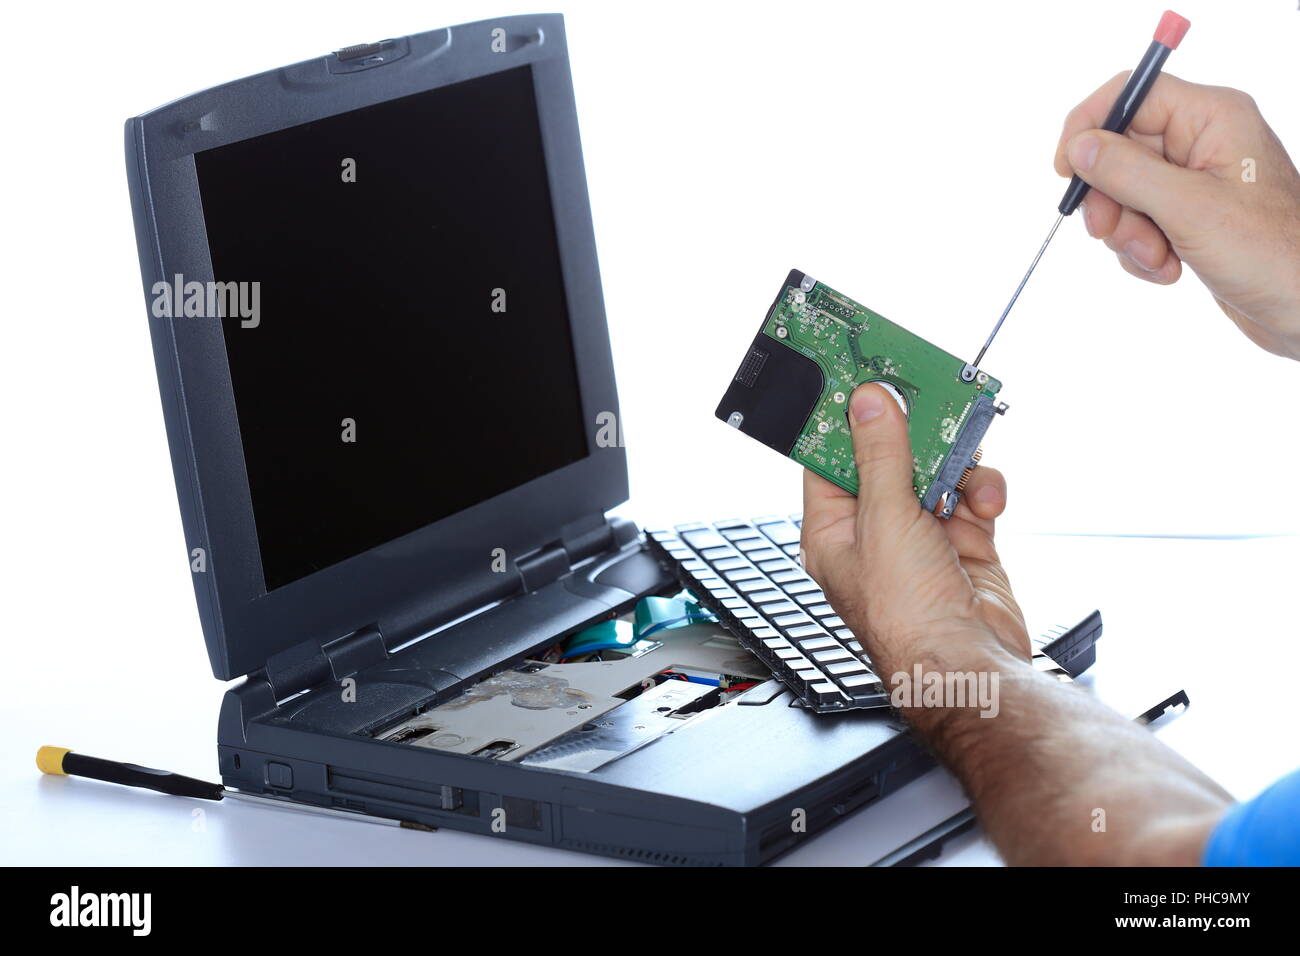 expert is repairing a computer Stock Photo